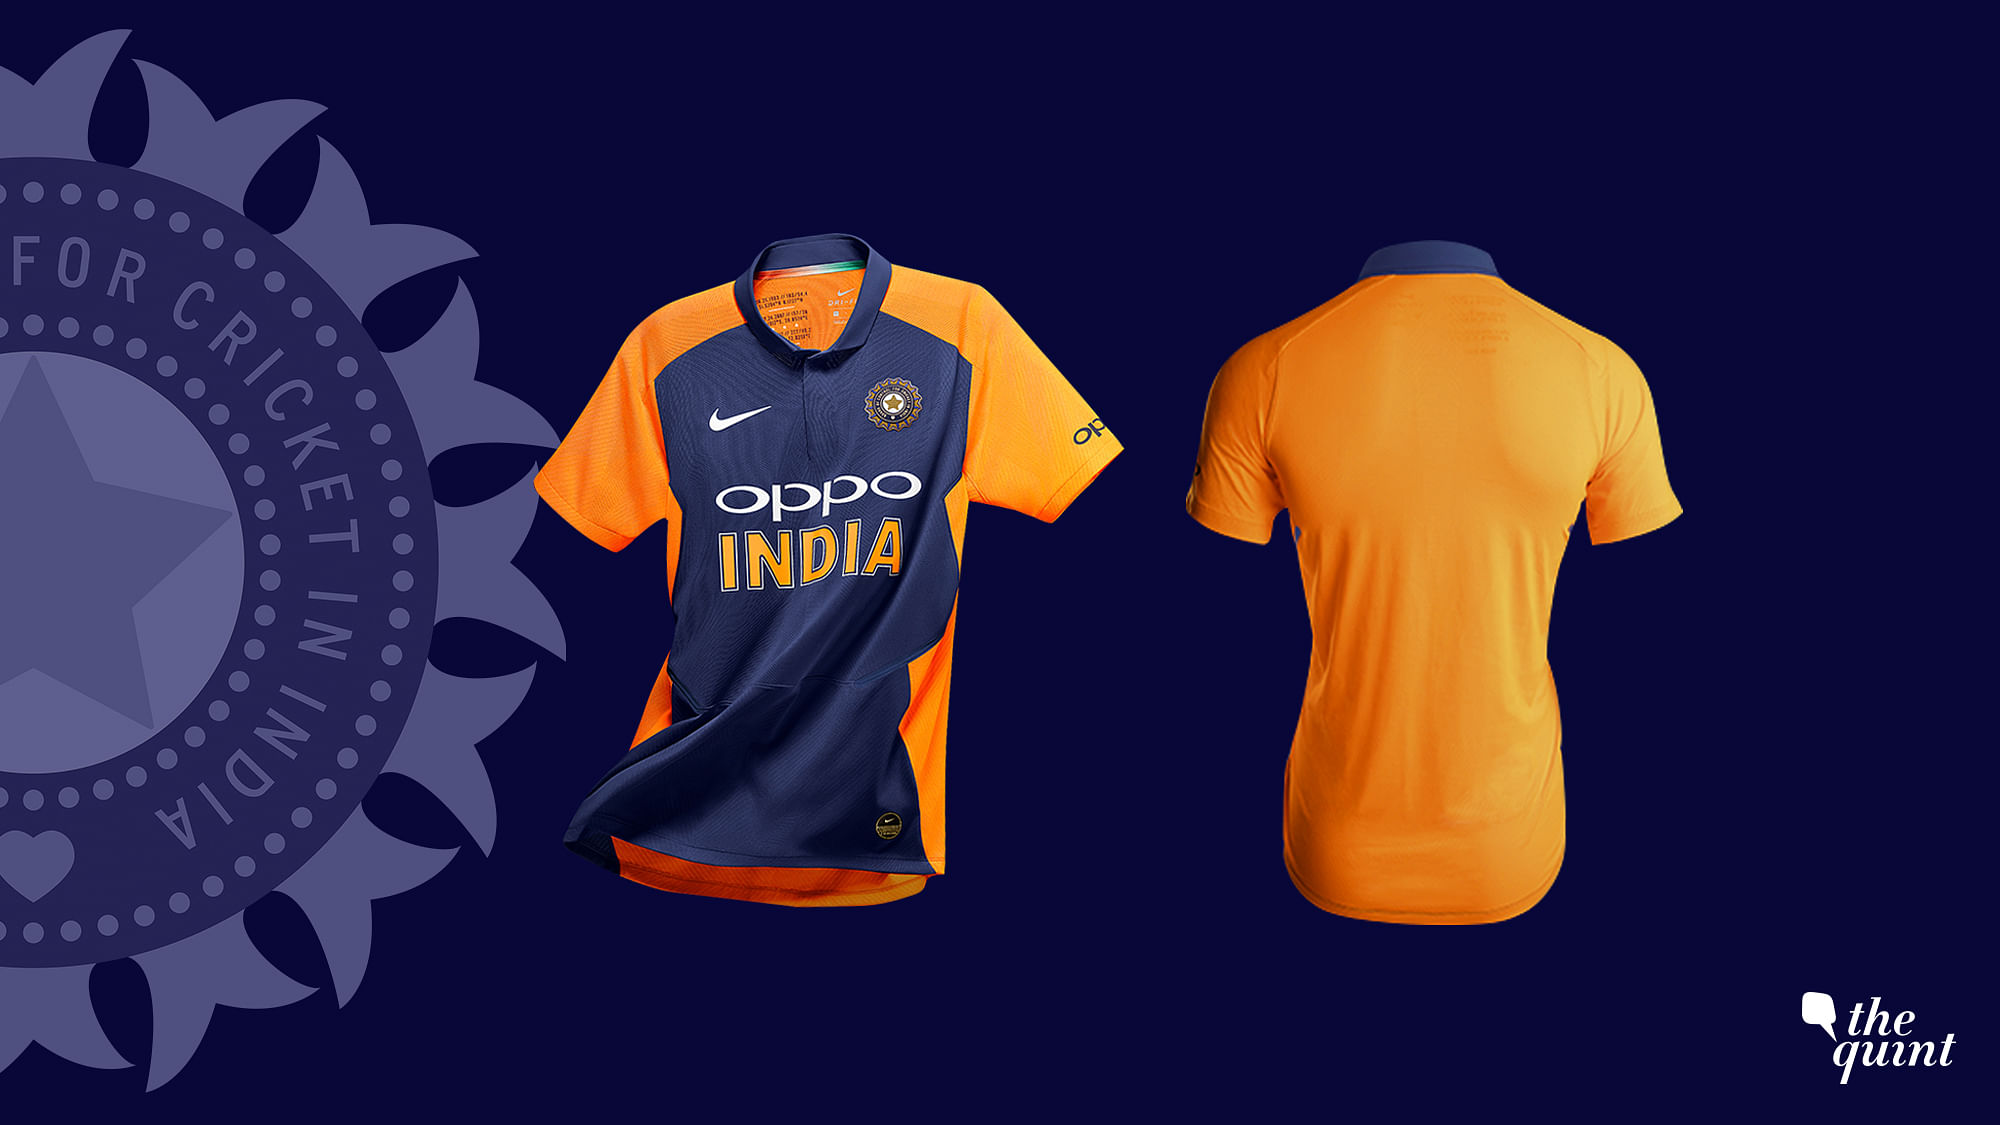 Orange Jersey India: India’s new orange and blue ‘away’ jersey that they will wear against England on Sunday.